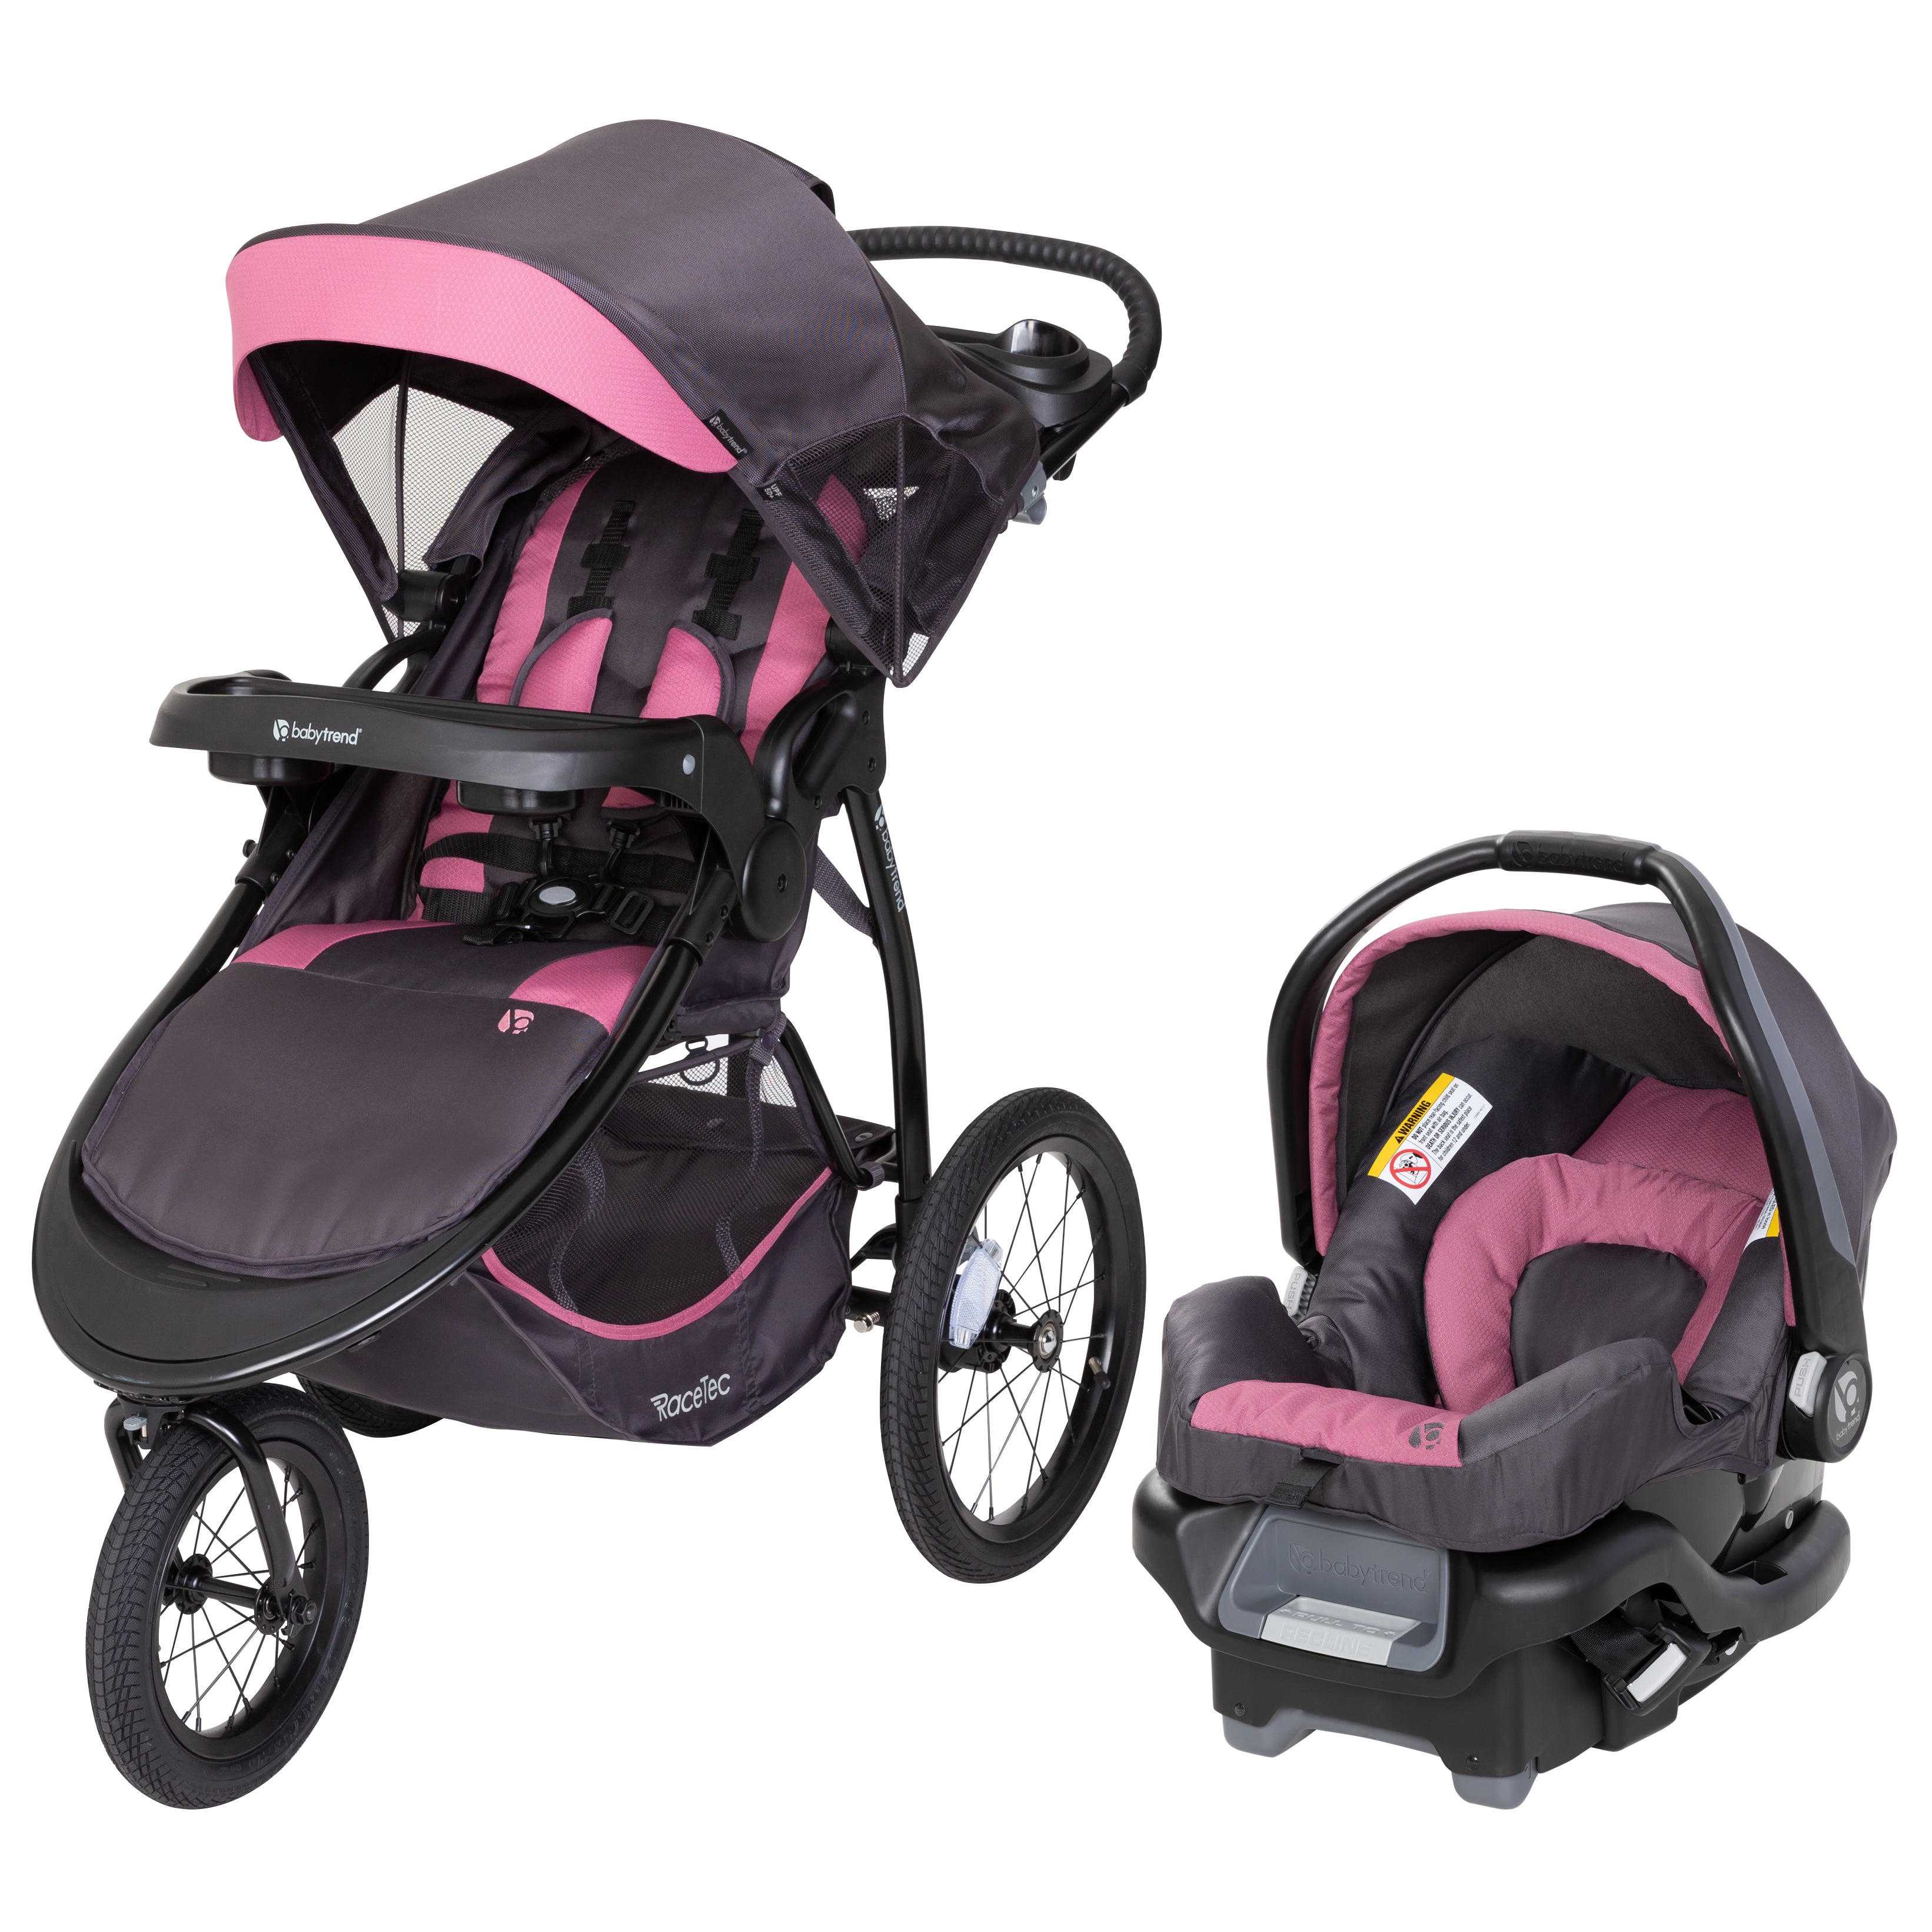 Baby Trend Tec™ Jogger Stroller System with Ally Infant Car Seat